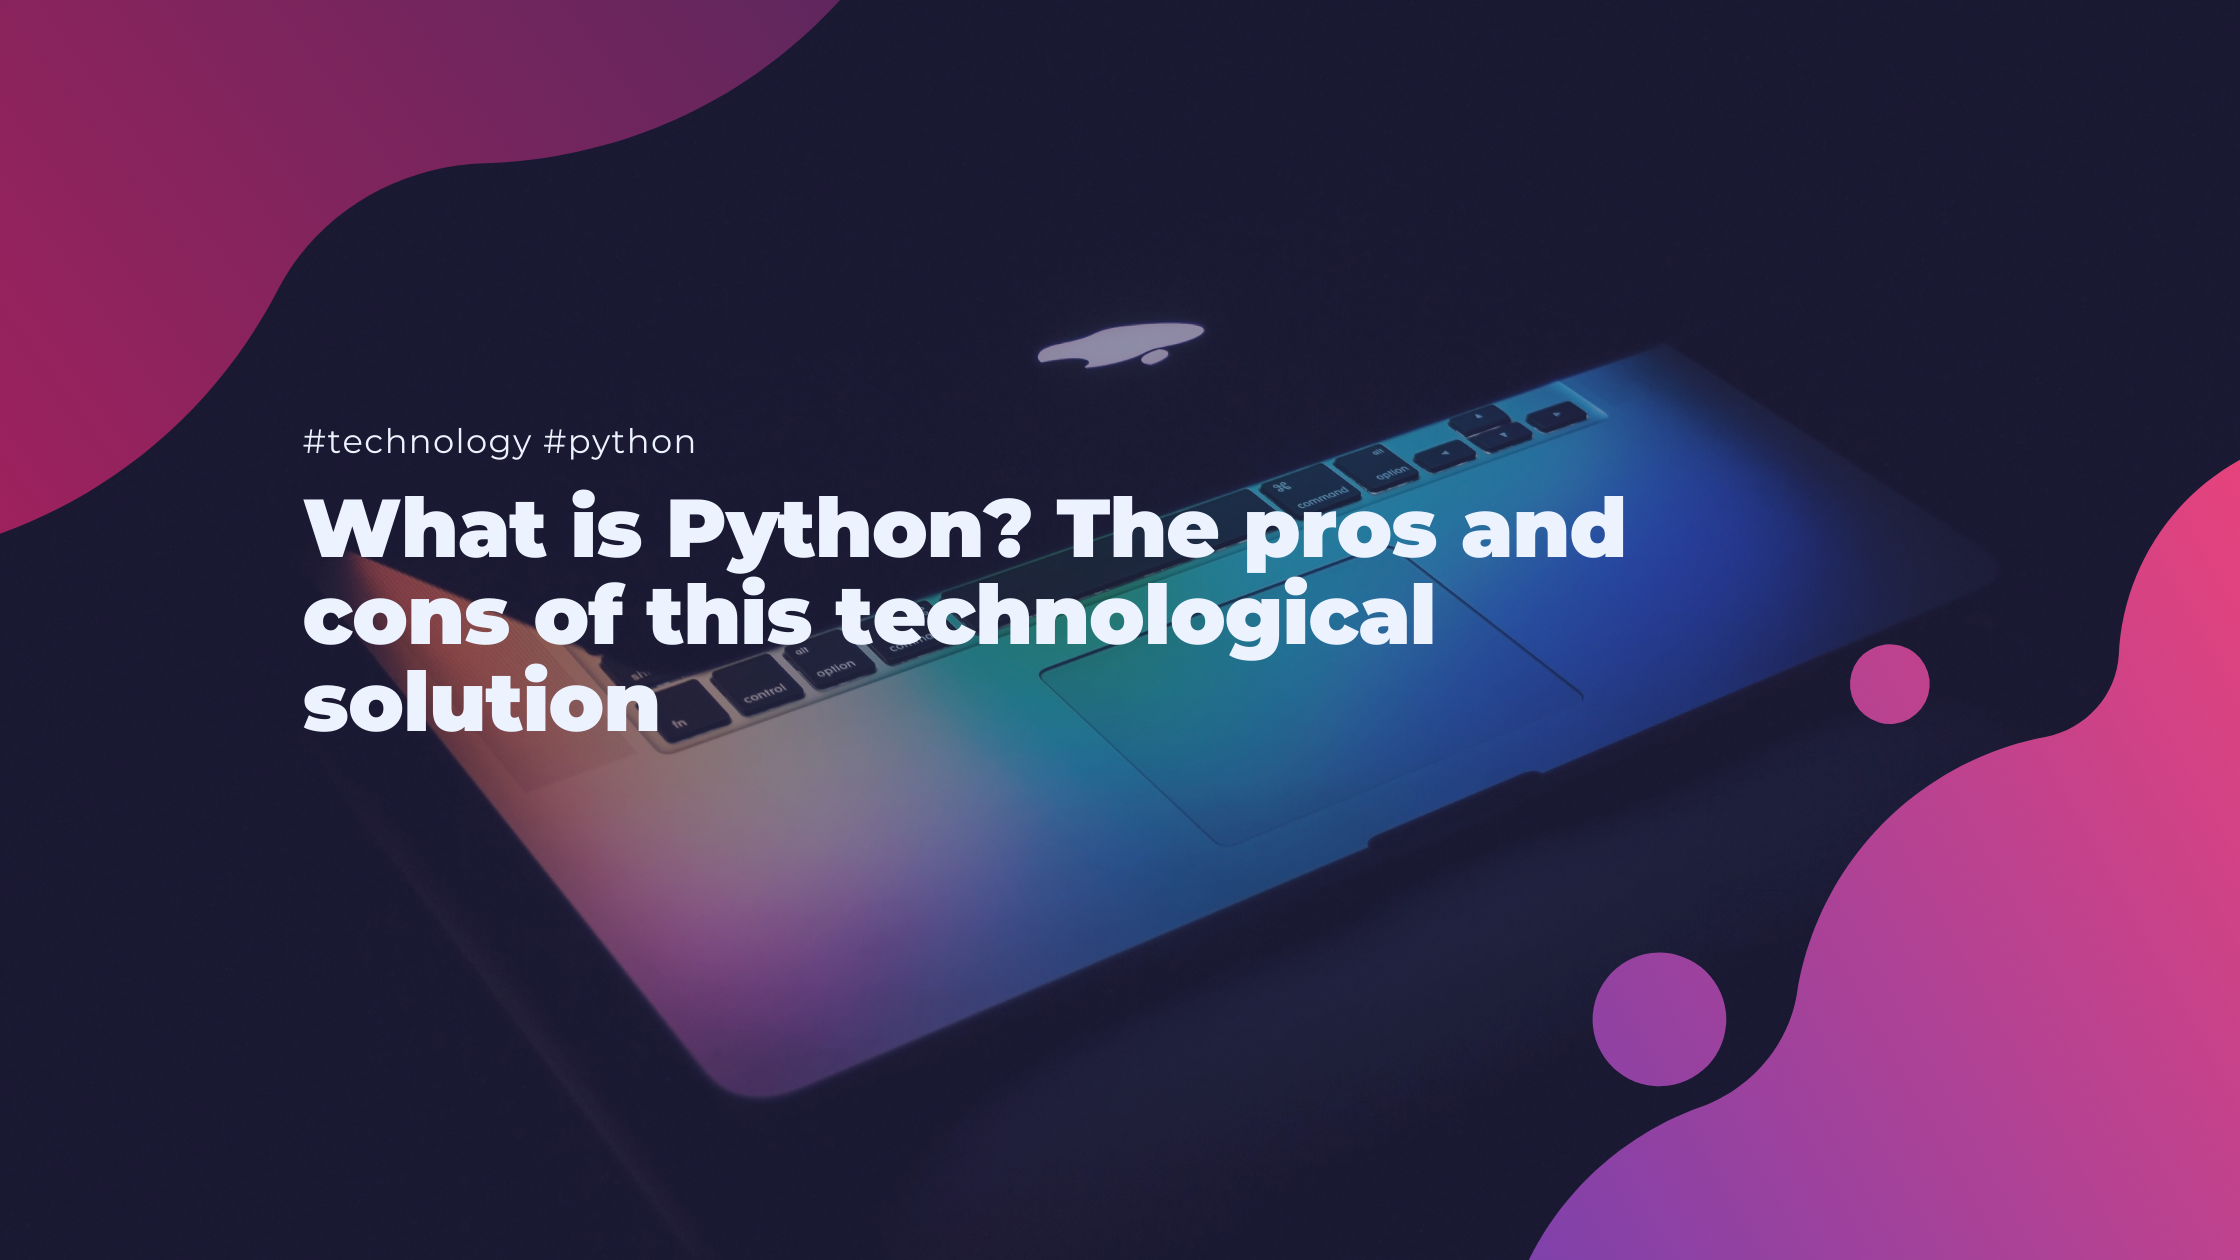 What is Python? The pros and cons of this technological solution